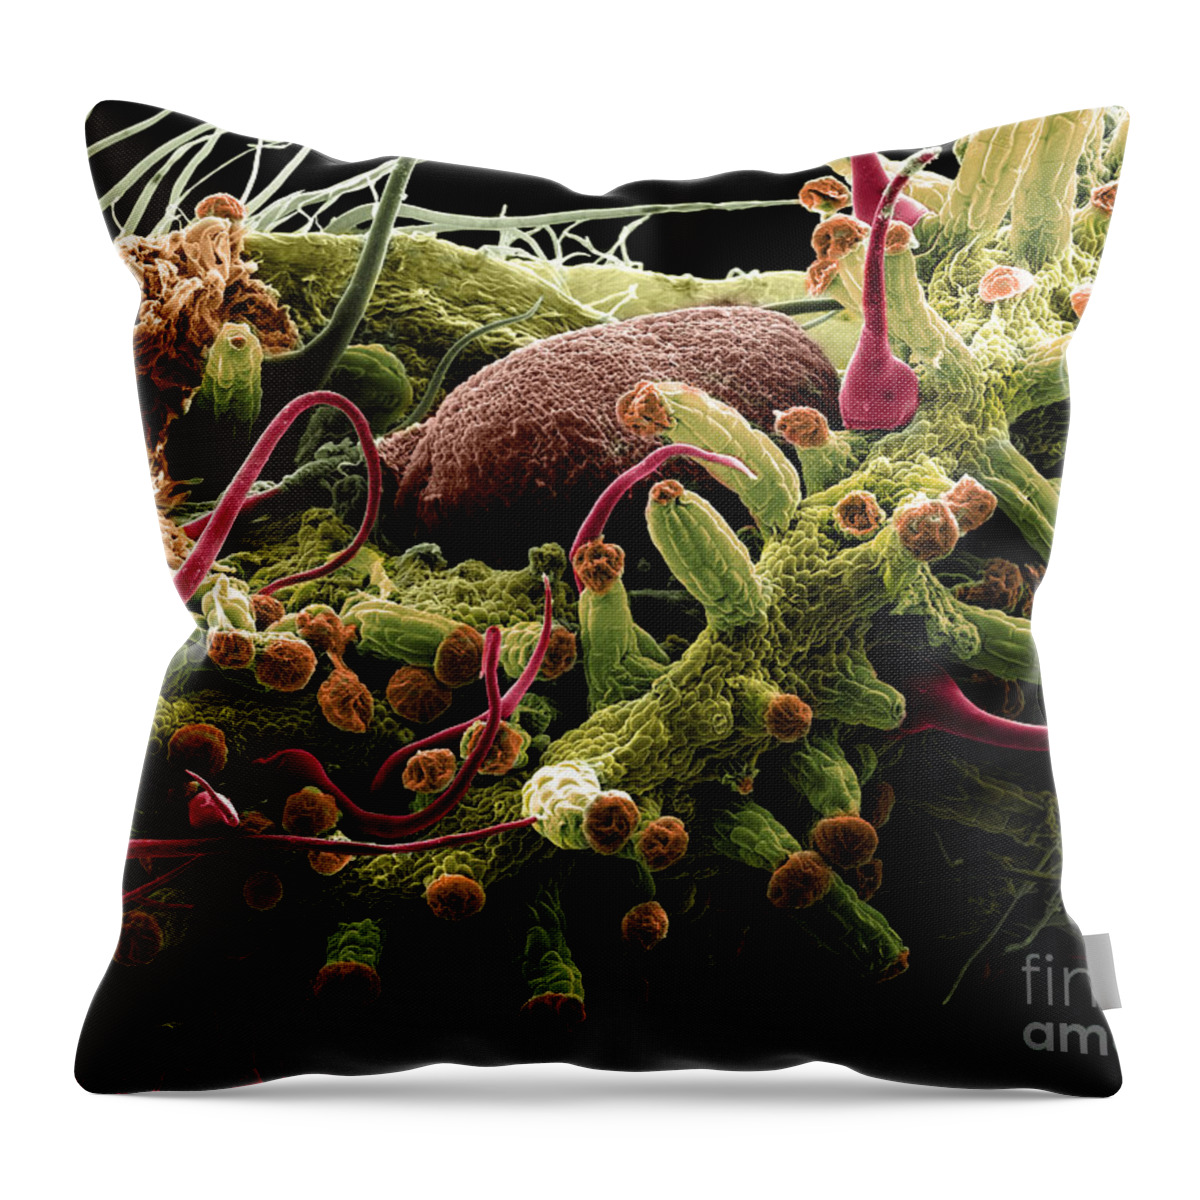 Botany Throw Pillow featuring the photograph Mature Cannabis Bud, Sem #1 by Ted Kinsman